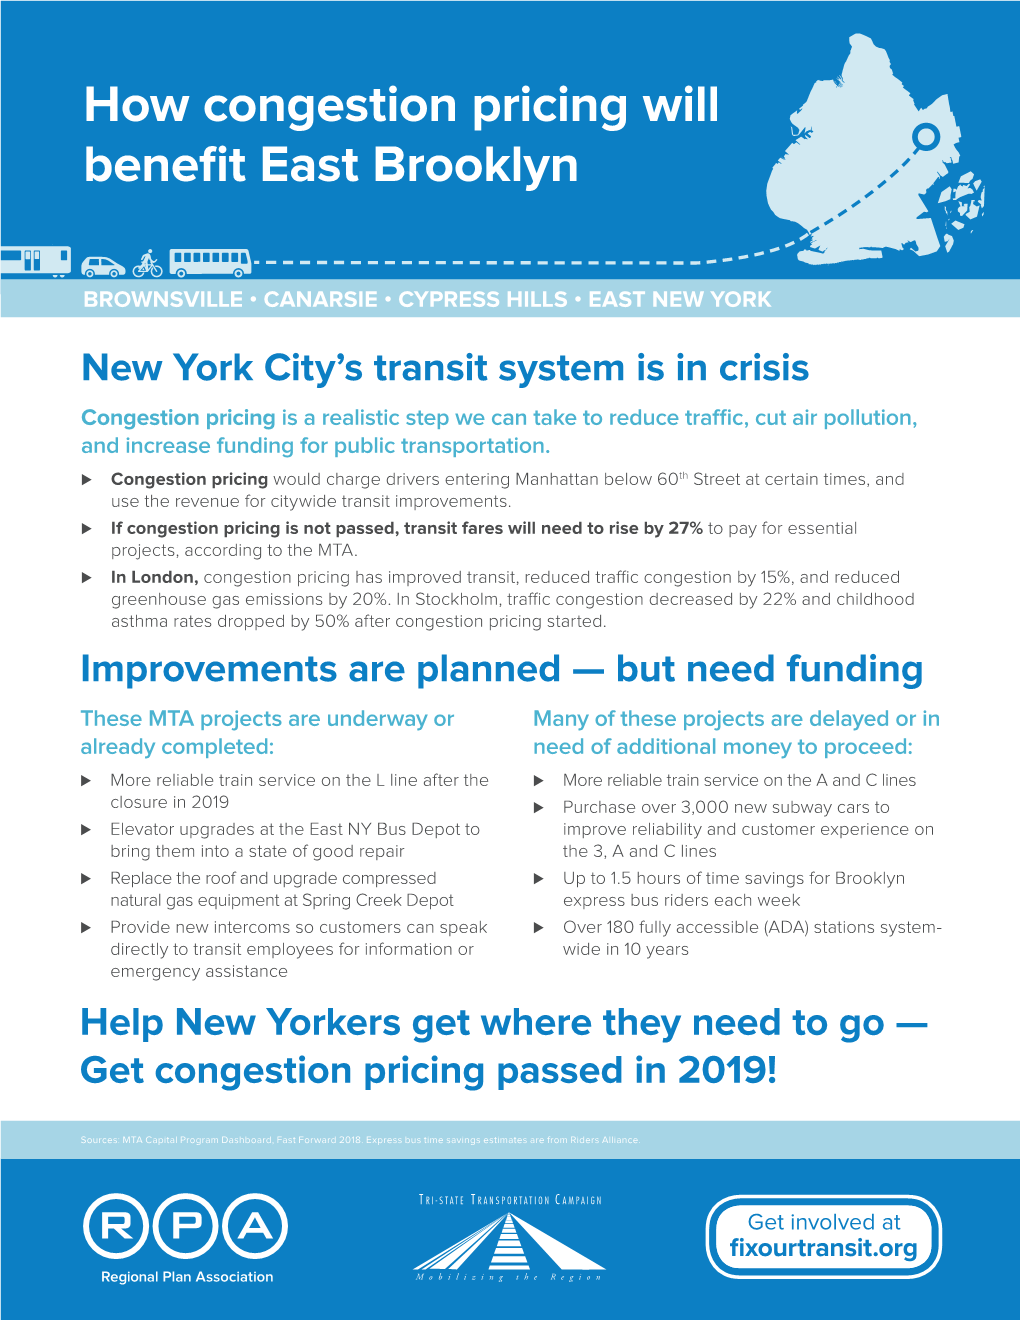 How Congestion Pricing Will Benefit East Brooklyn